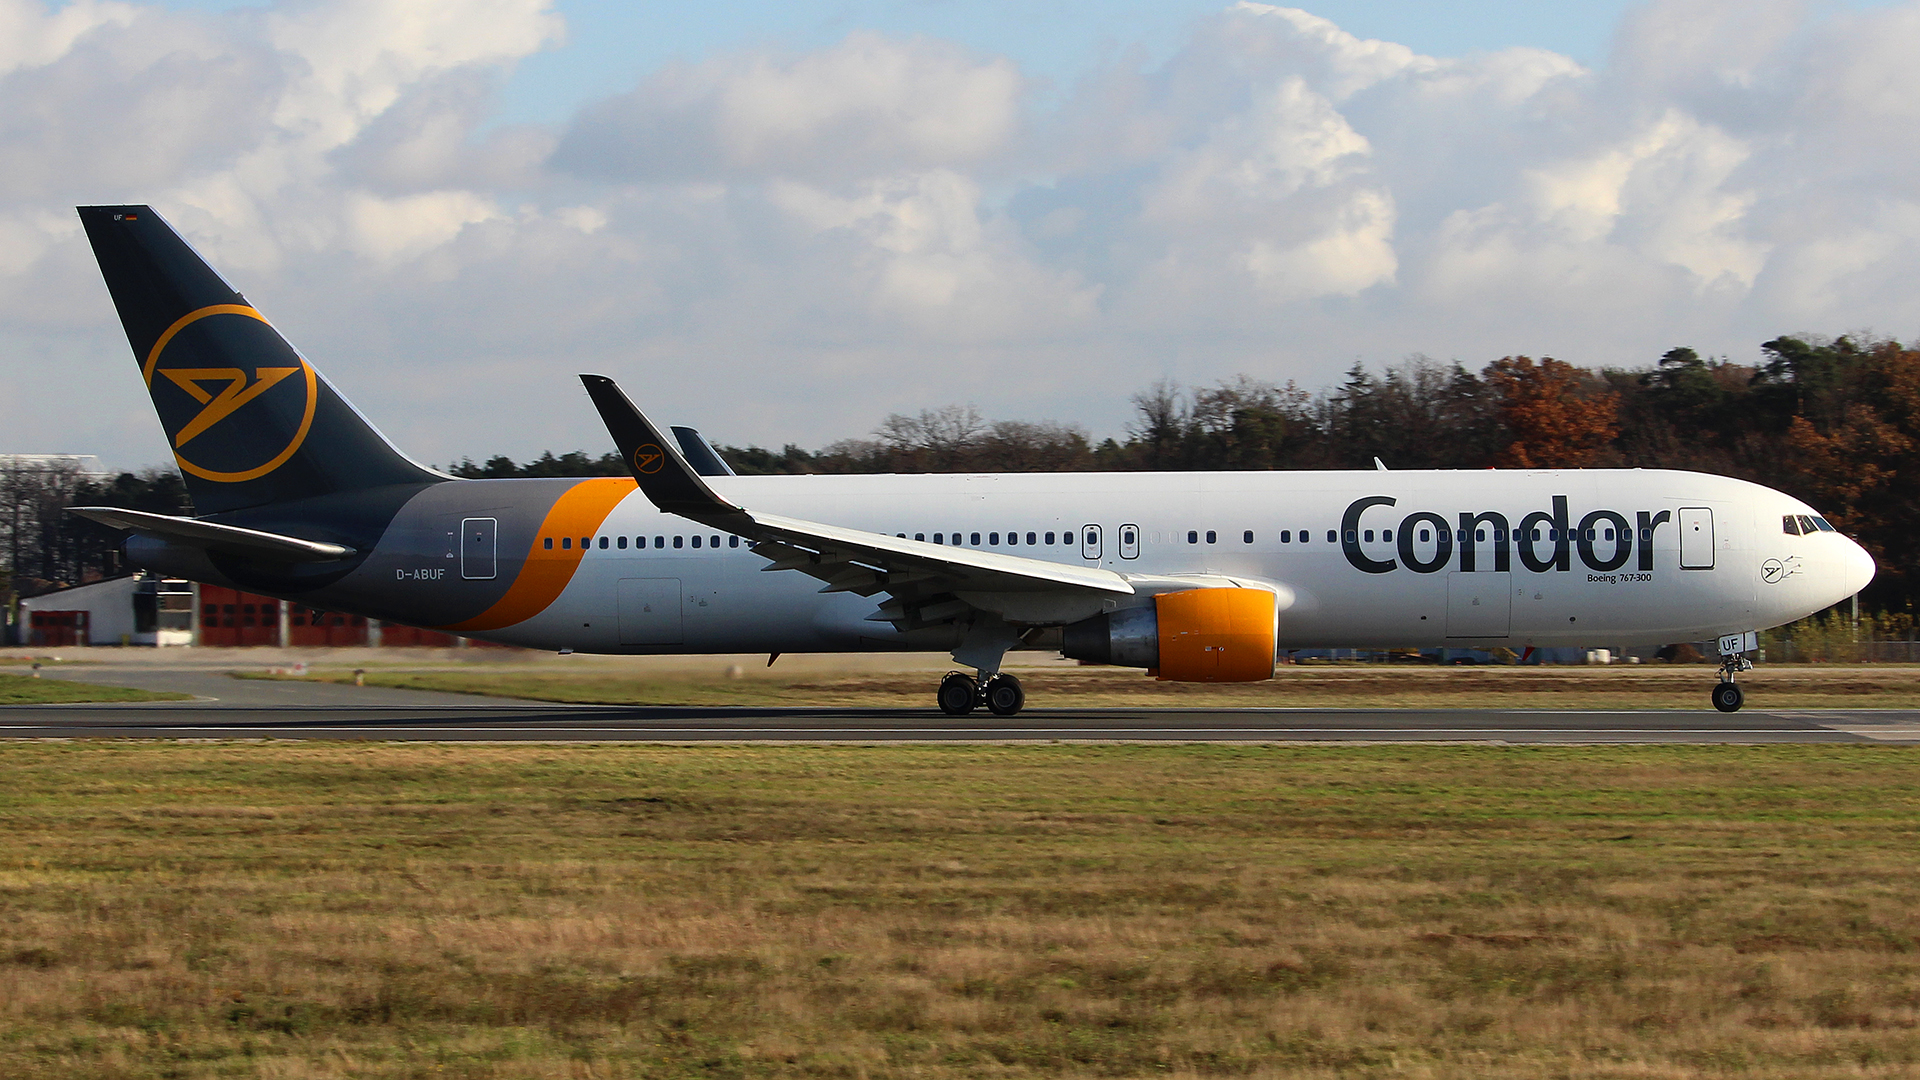 Condor airline company reduces fuel expenses with the help of eWAS applications from SITA . Part 1